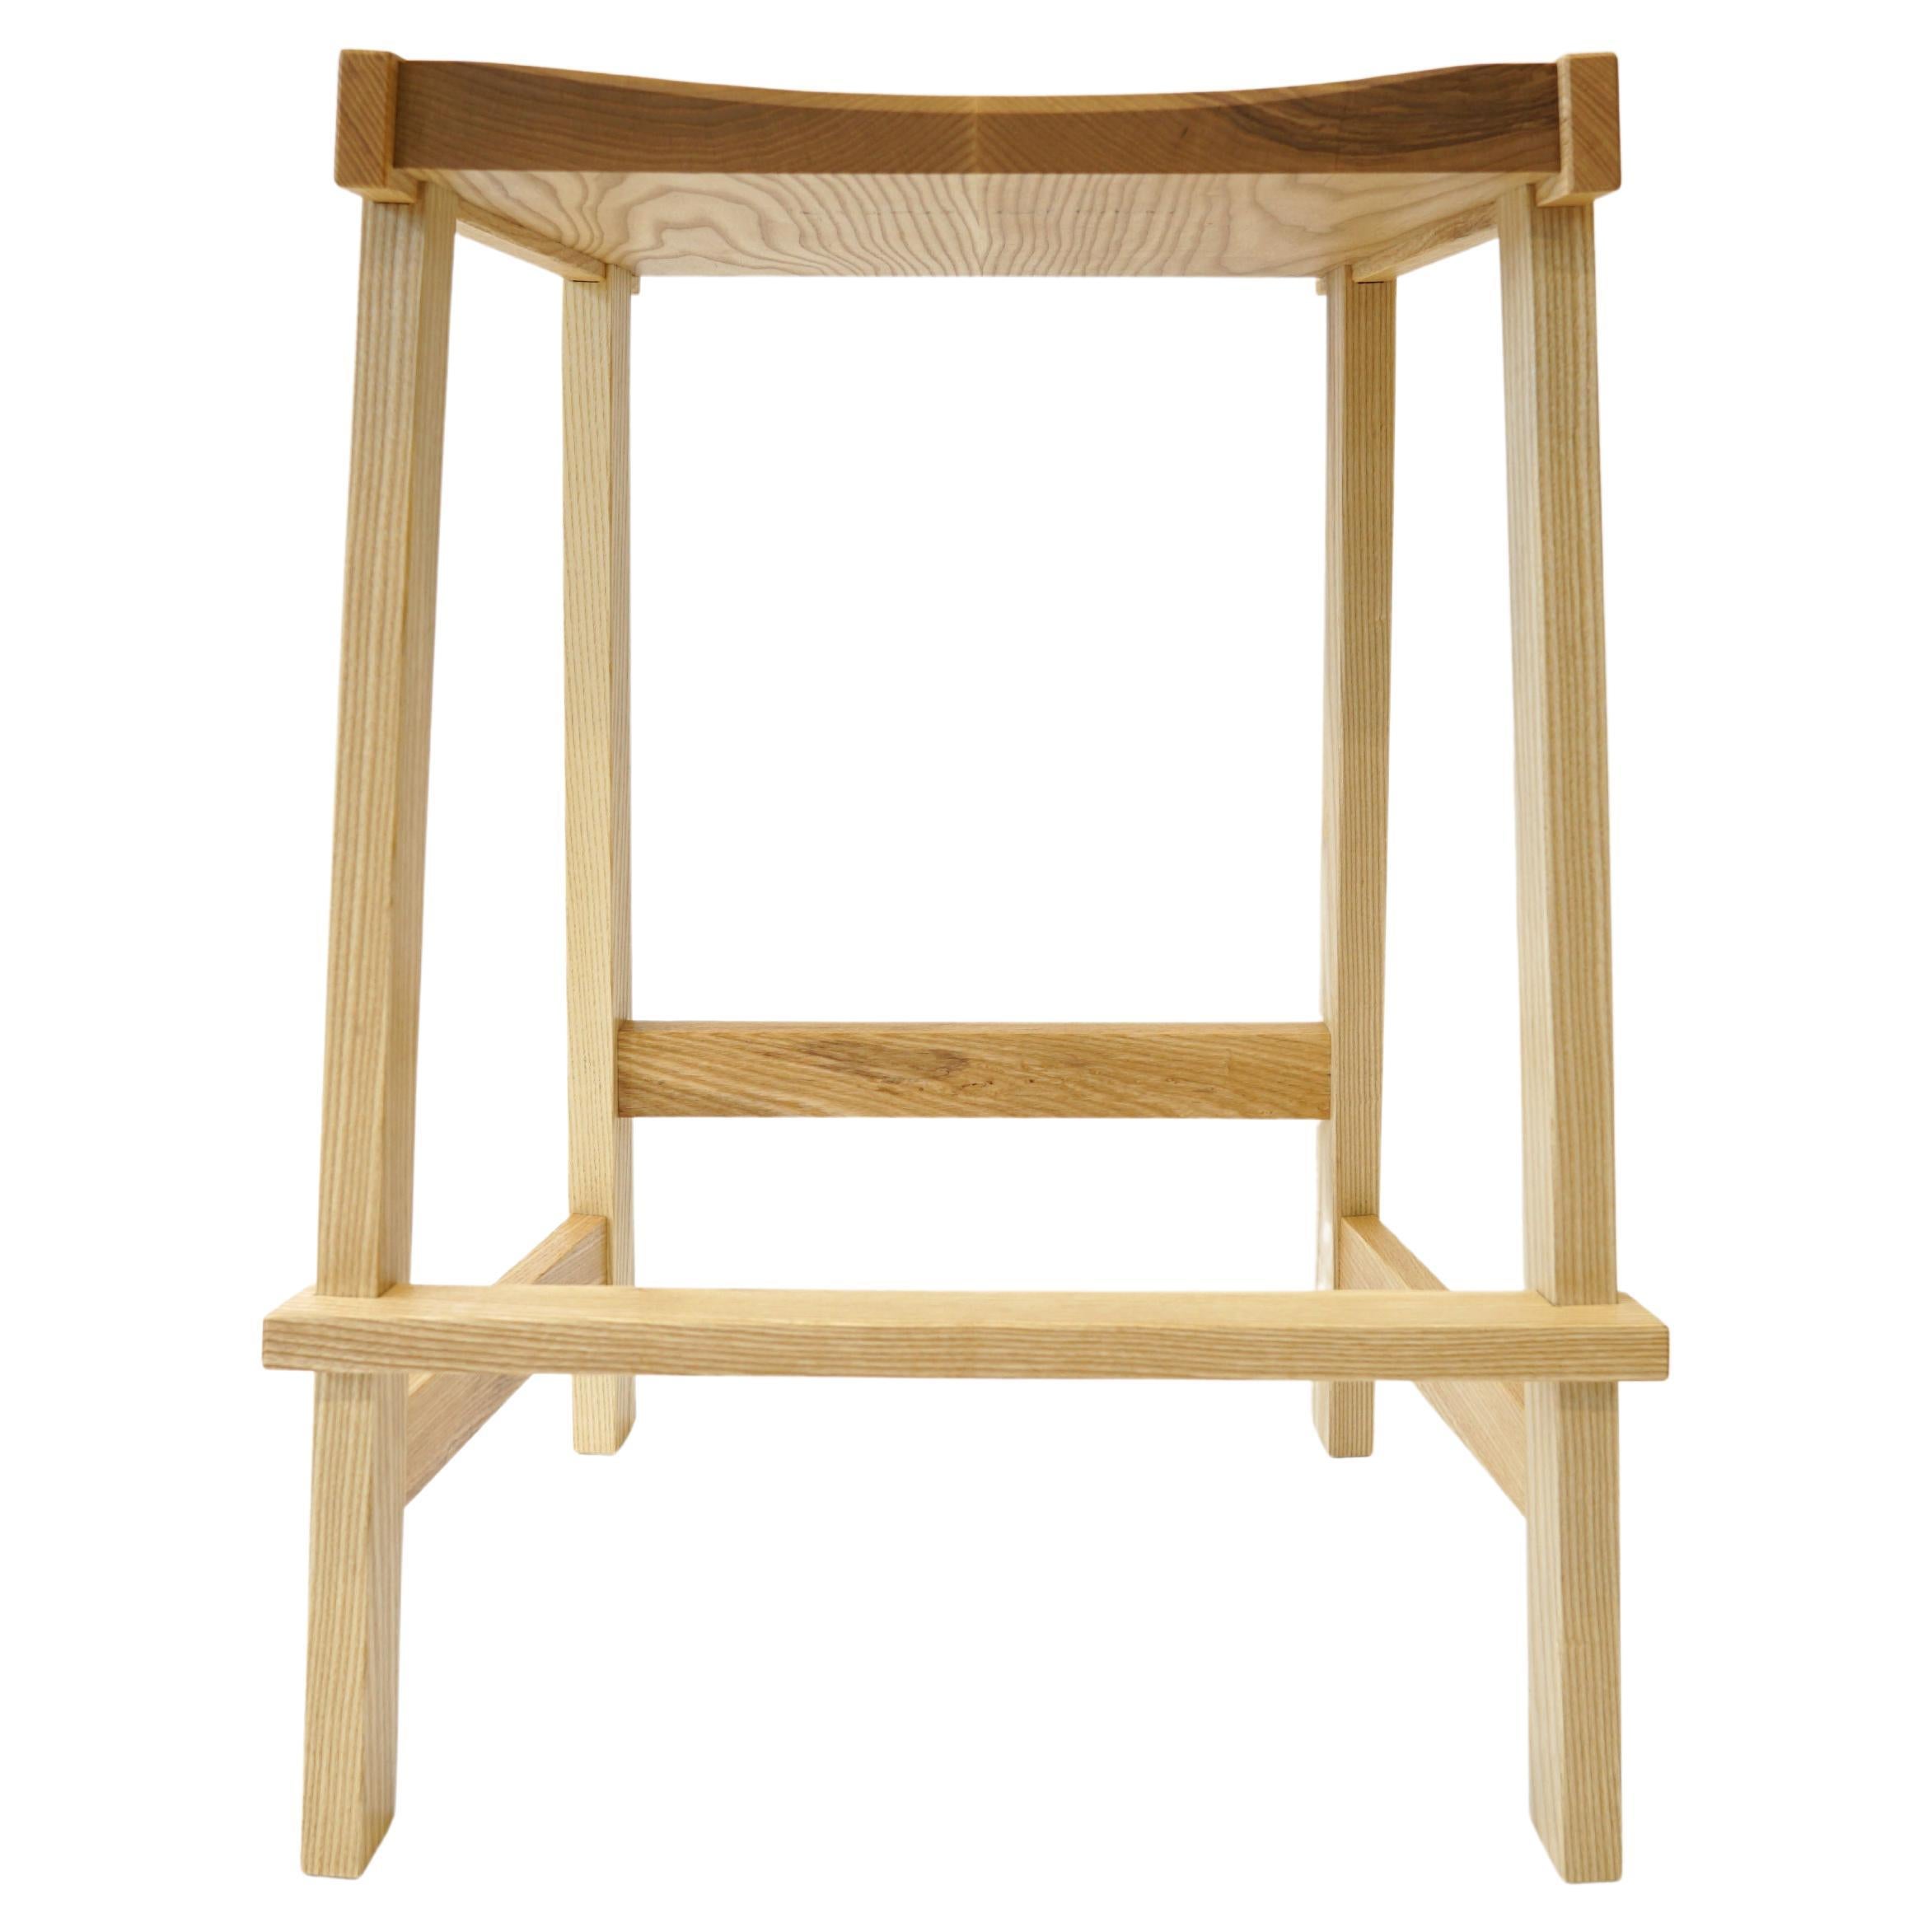 Montrose Stool in Ash, Exposed Joinery with a Hand Carved Seat